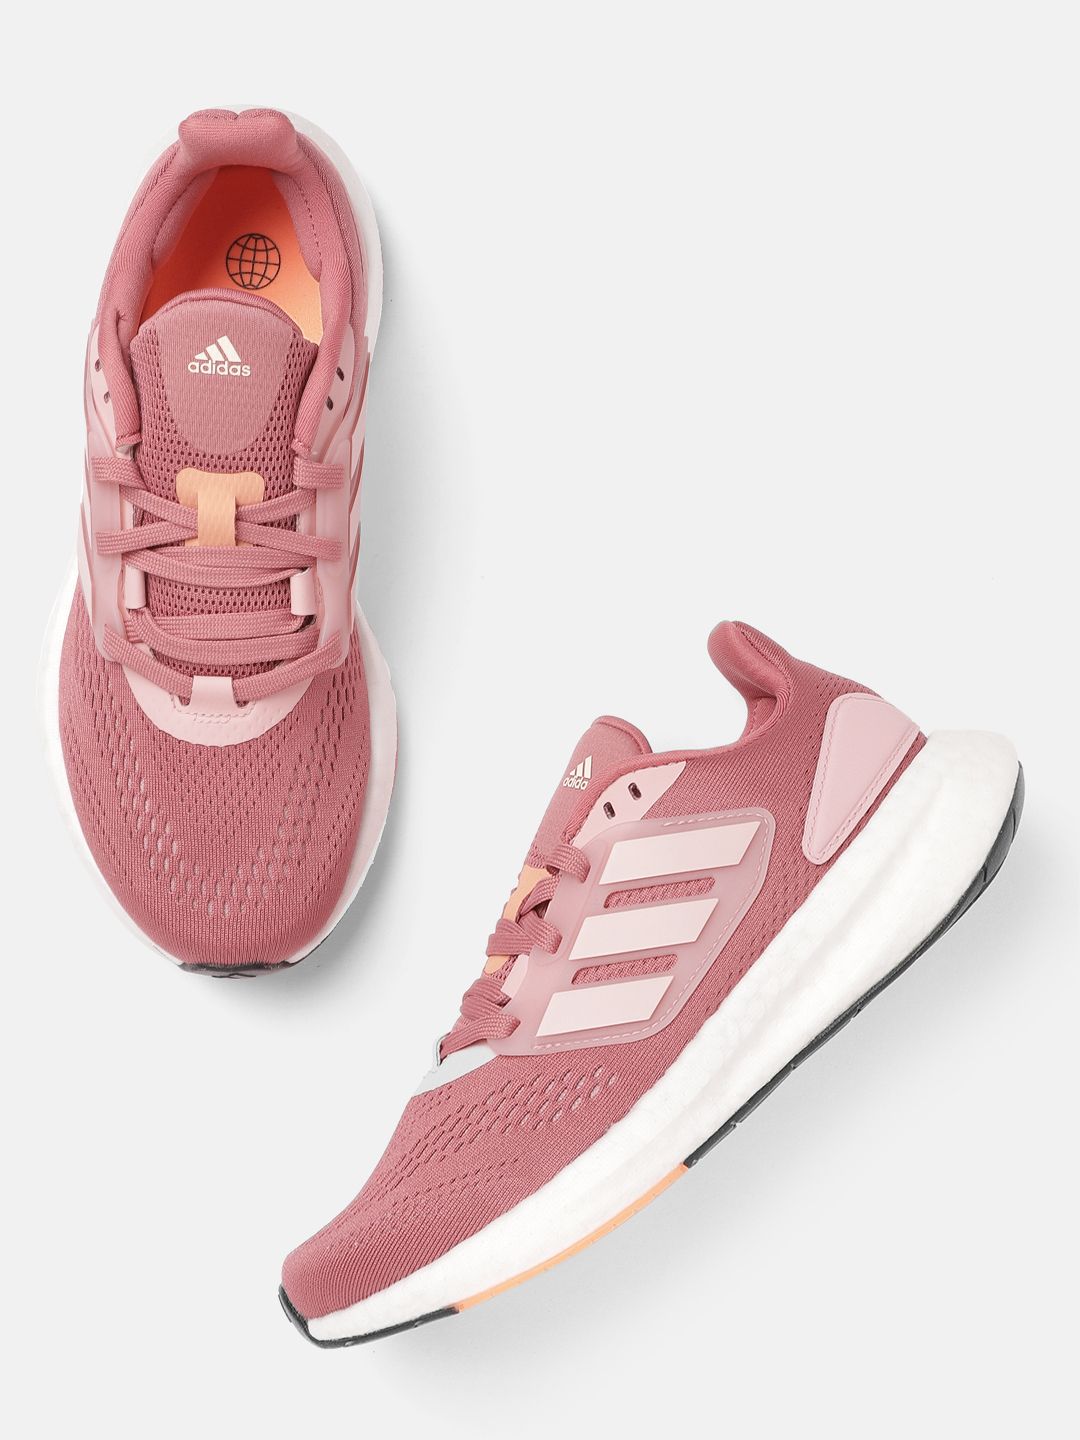 ADIDAS Women Dusty Pink Woven Design Pureboost 22 Running Shoes Price in India